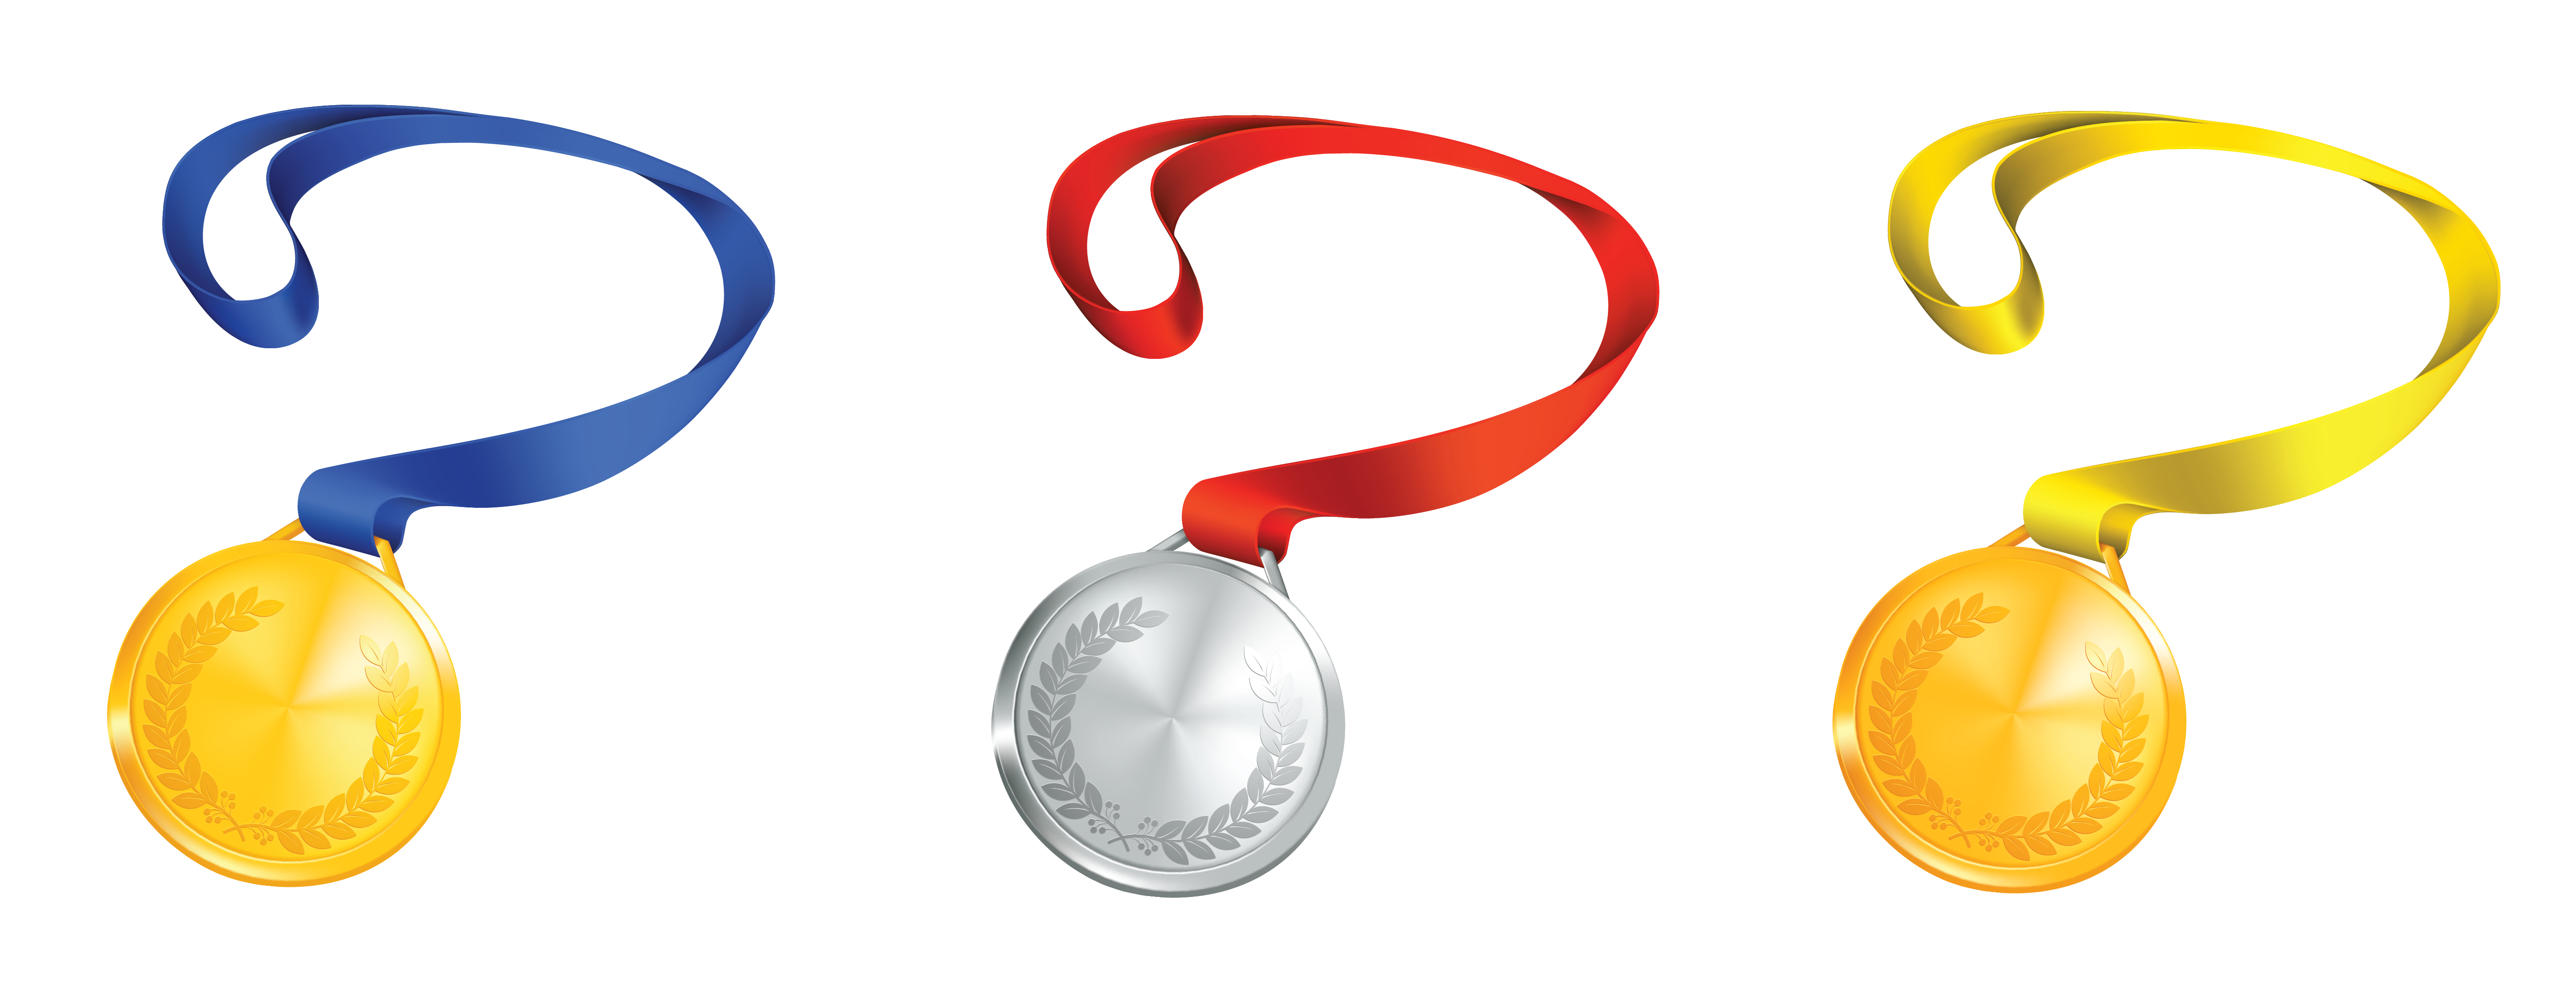 medals clipart - photo #35